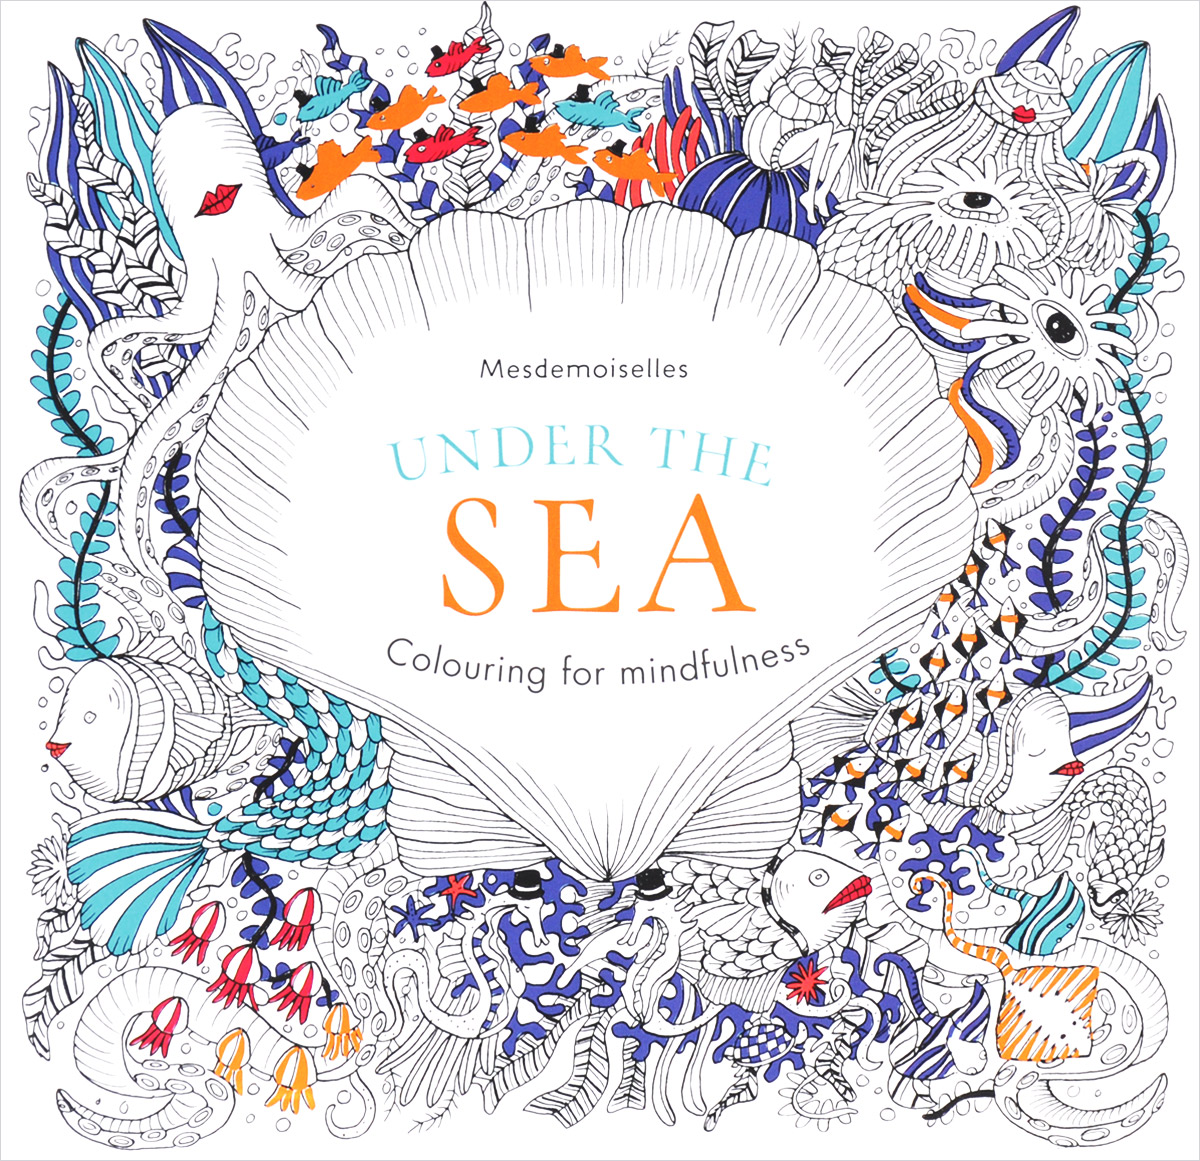 Under the Sea: Colouring for Mindfulness